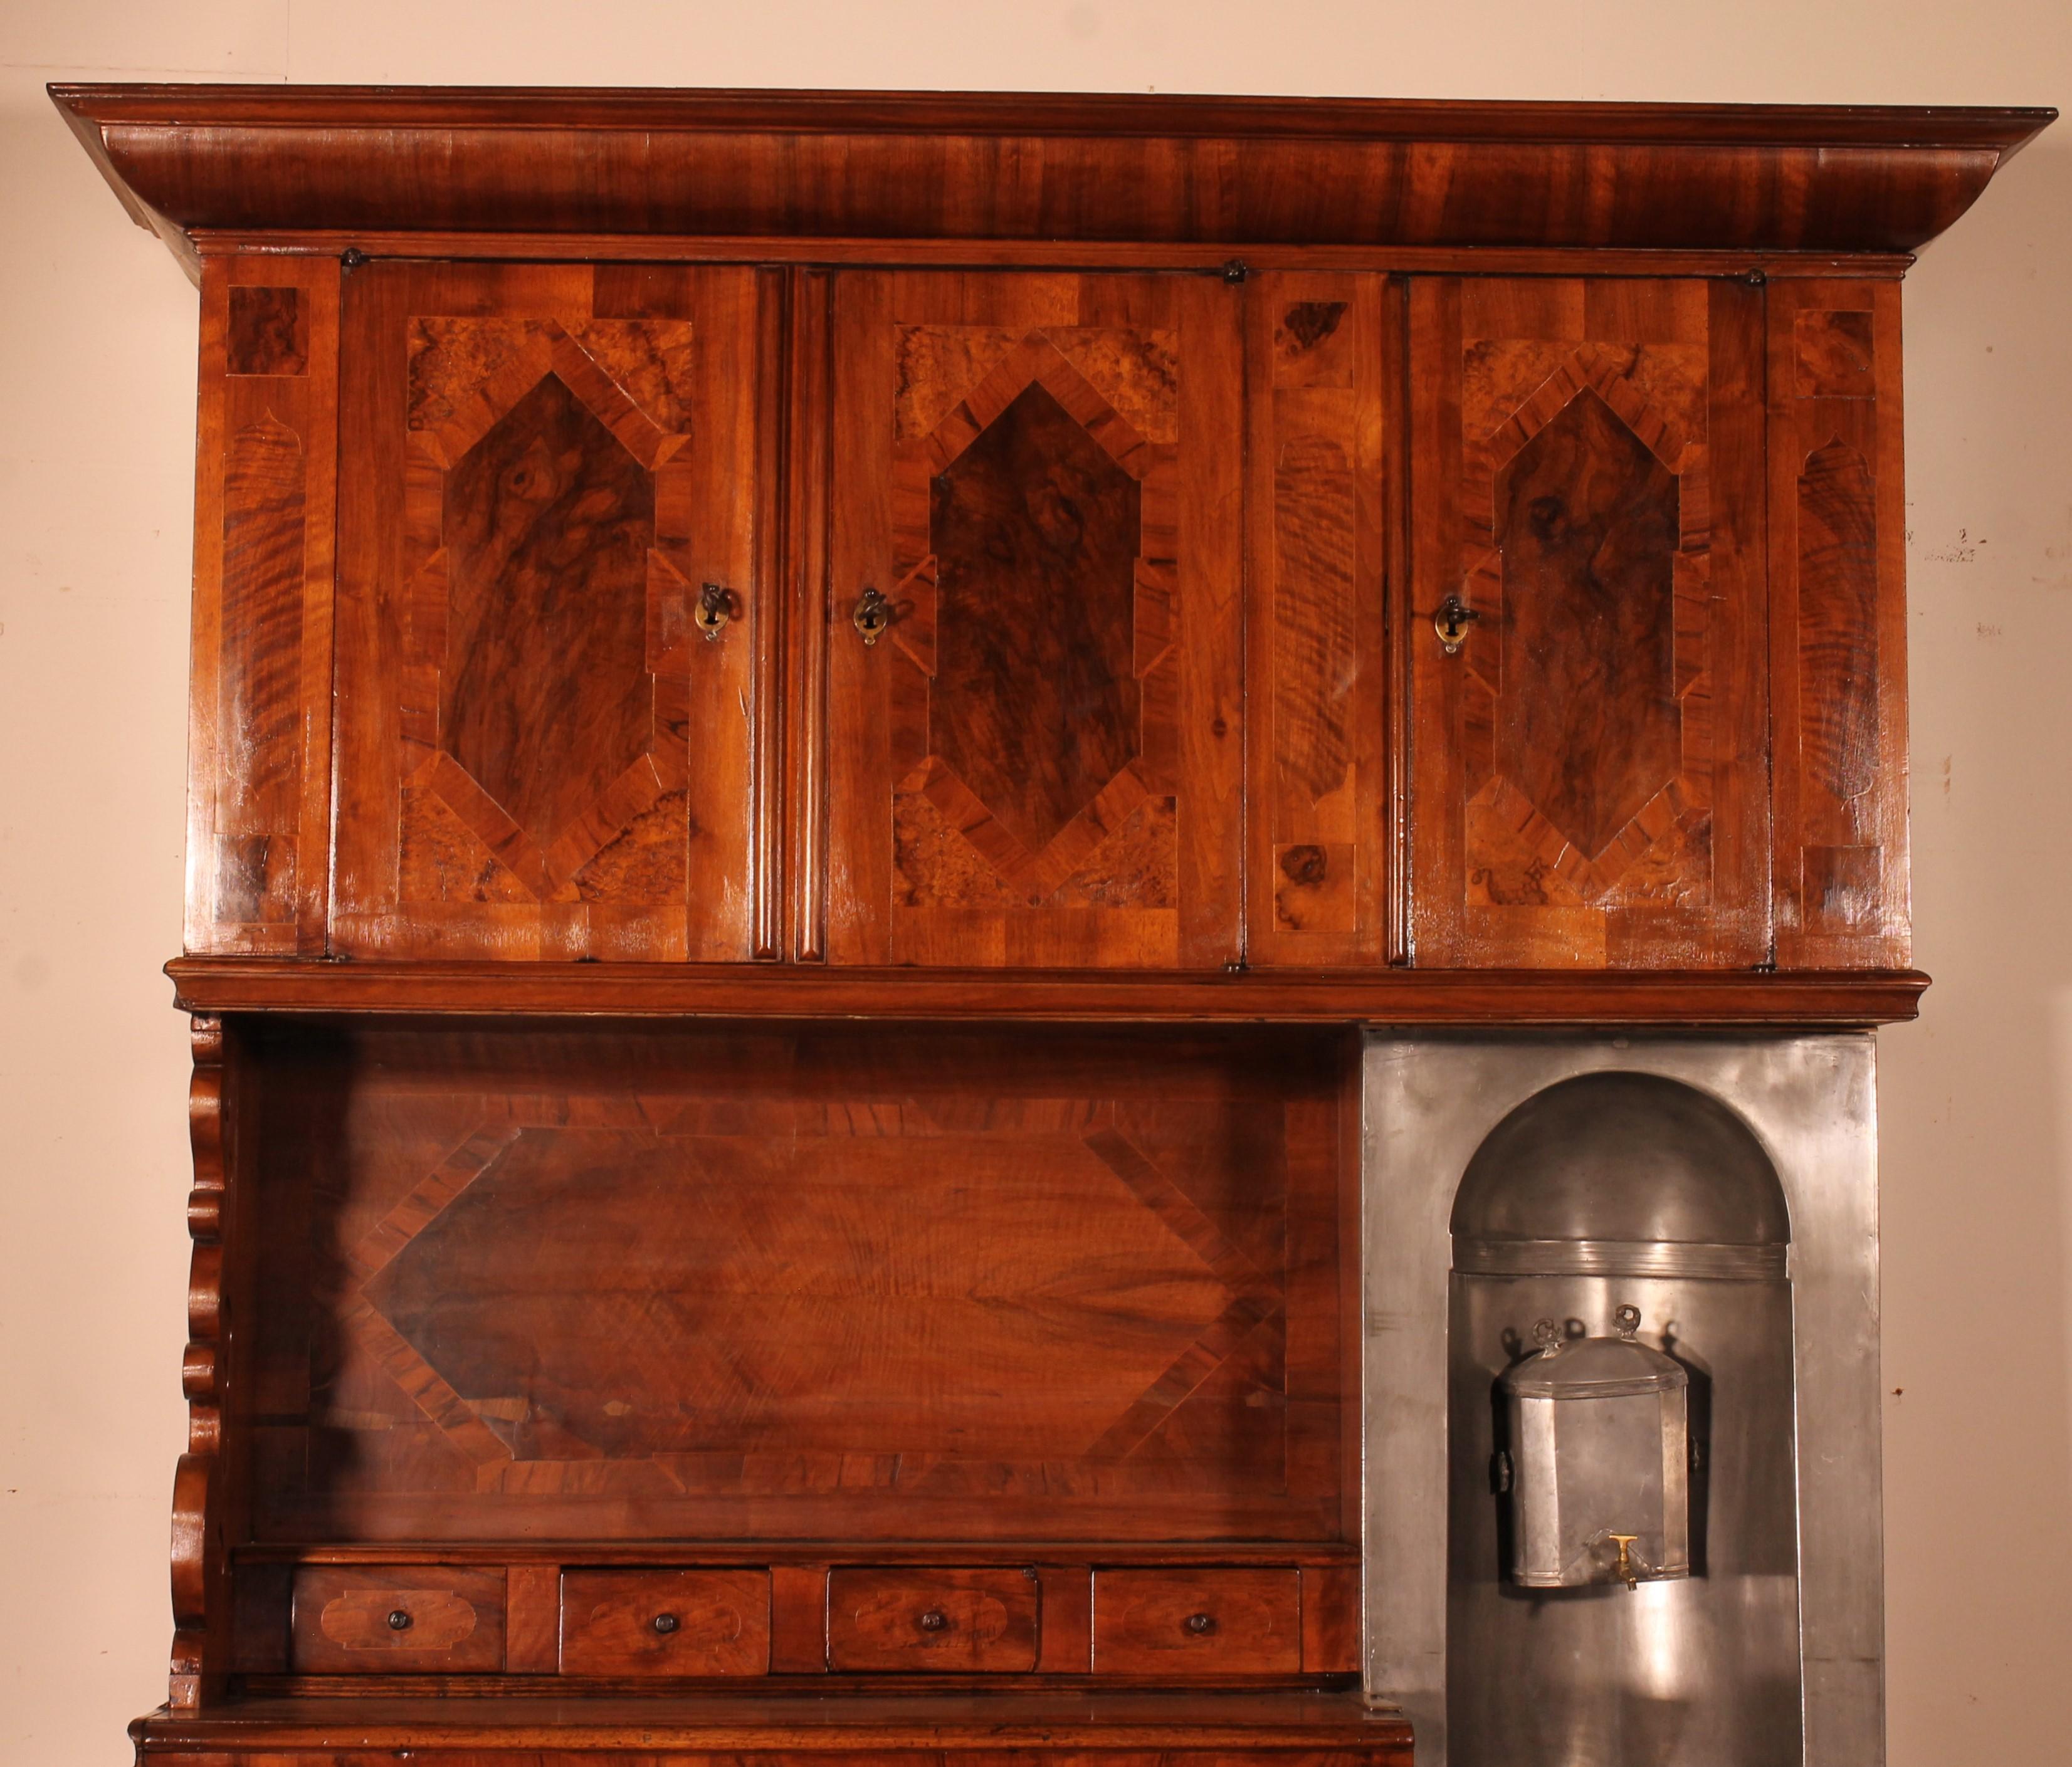 Superb 6-door walnut cabinet from the 17th century in Louis XIV style, probably Switzerland.
Very beautiful unique piece of furniture with a fountain which stands out from the usual sideboards. The first we have seen in 50 years

Superb walnut